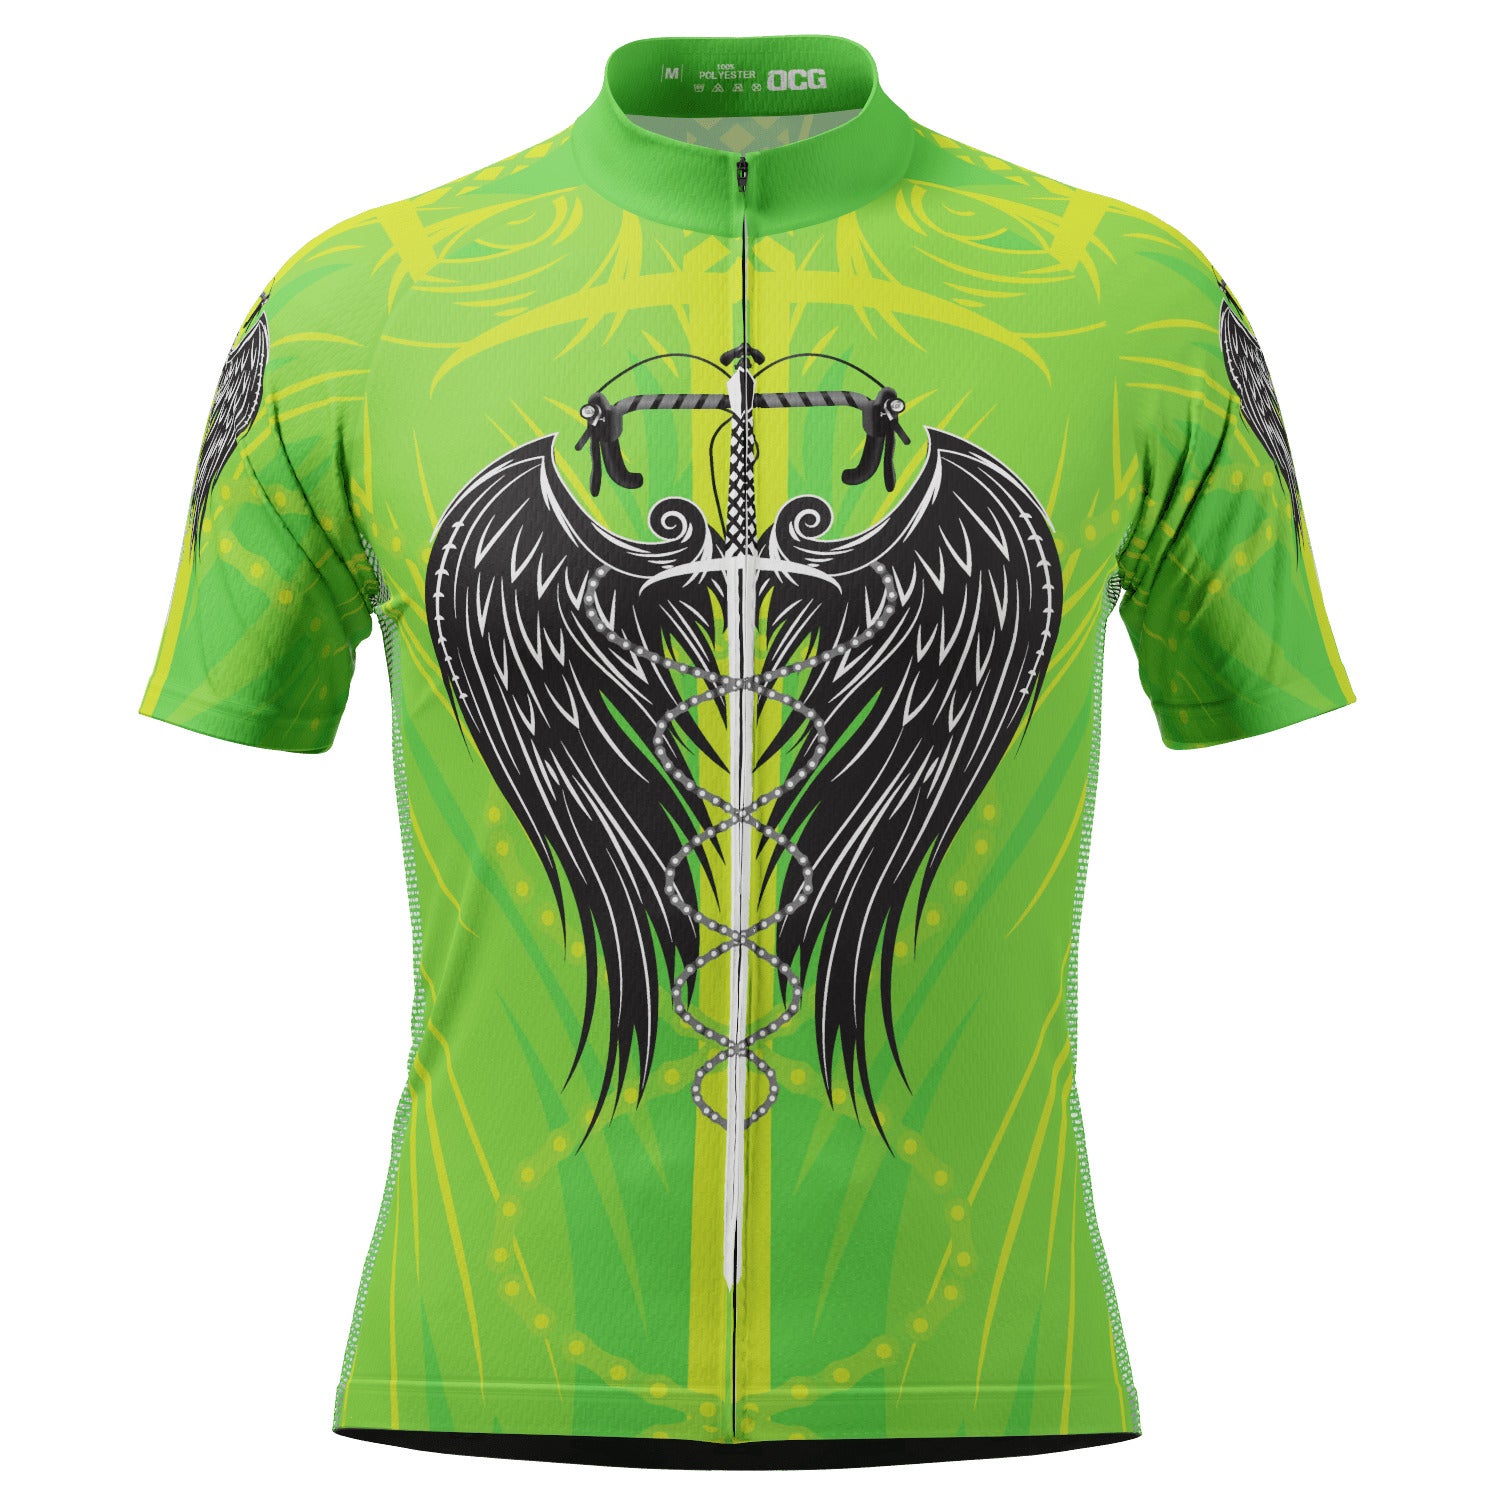 Men's Cycling Is The Best Medicine Short Sleeve Cycling Jersey